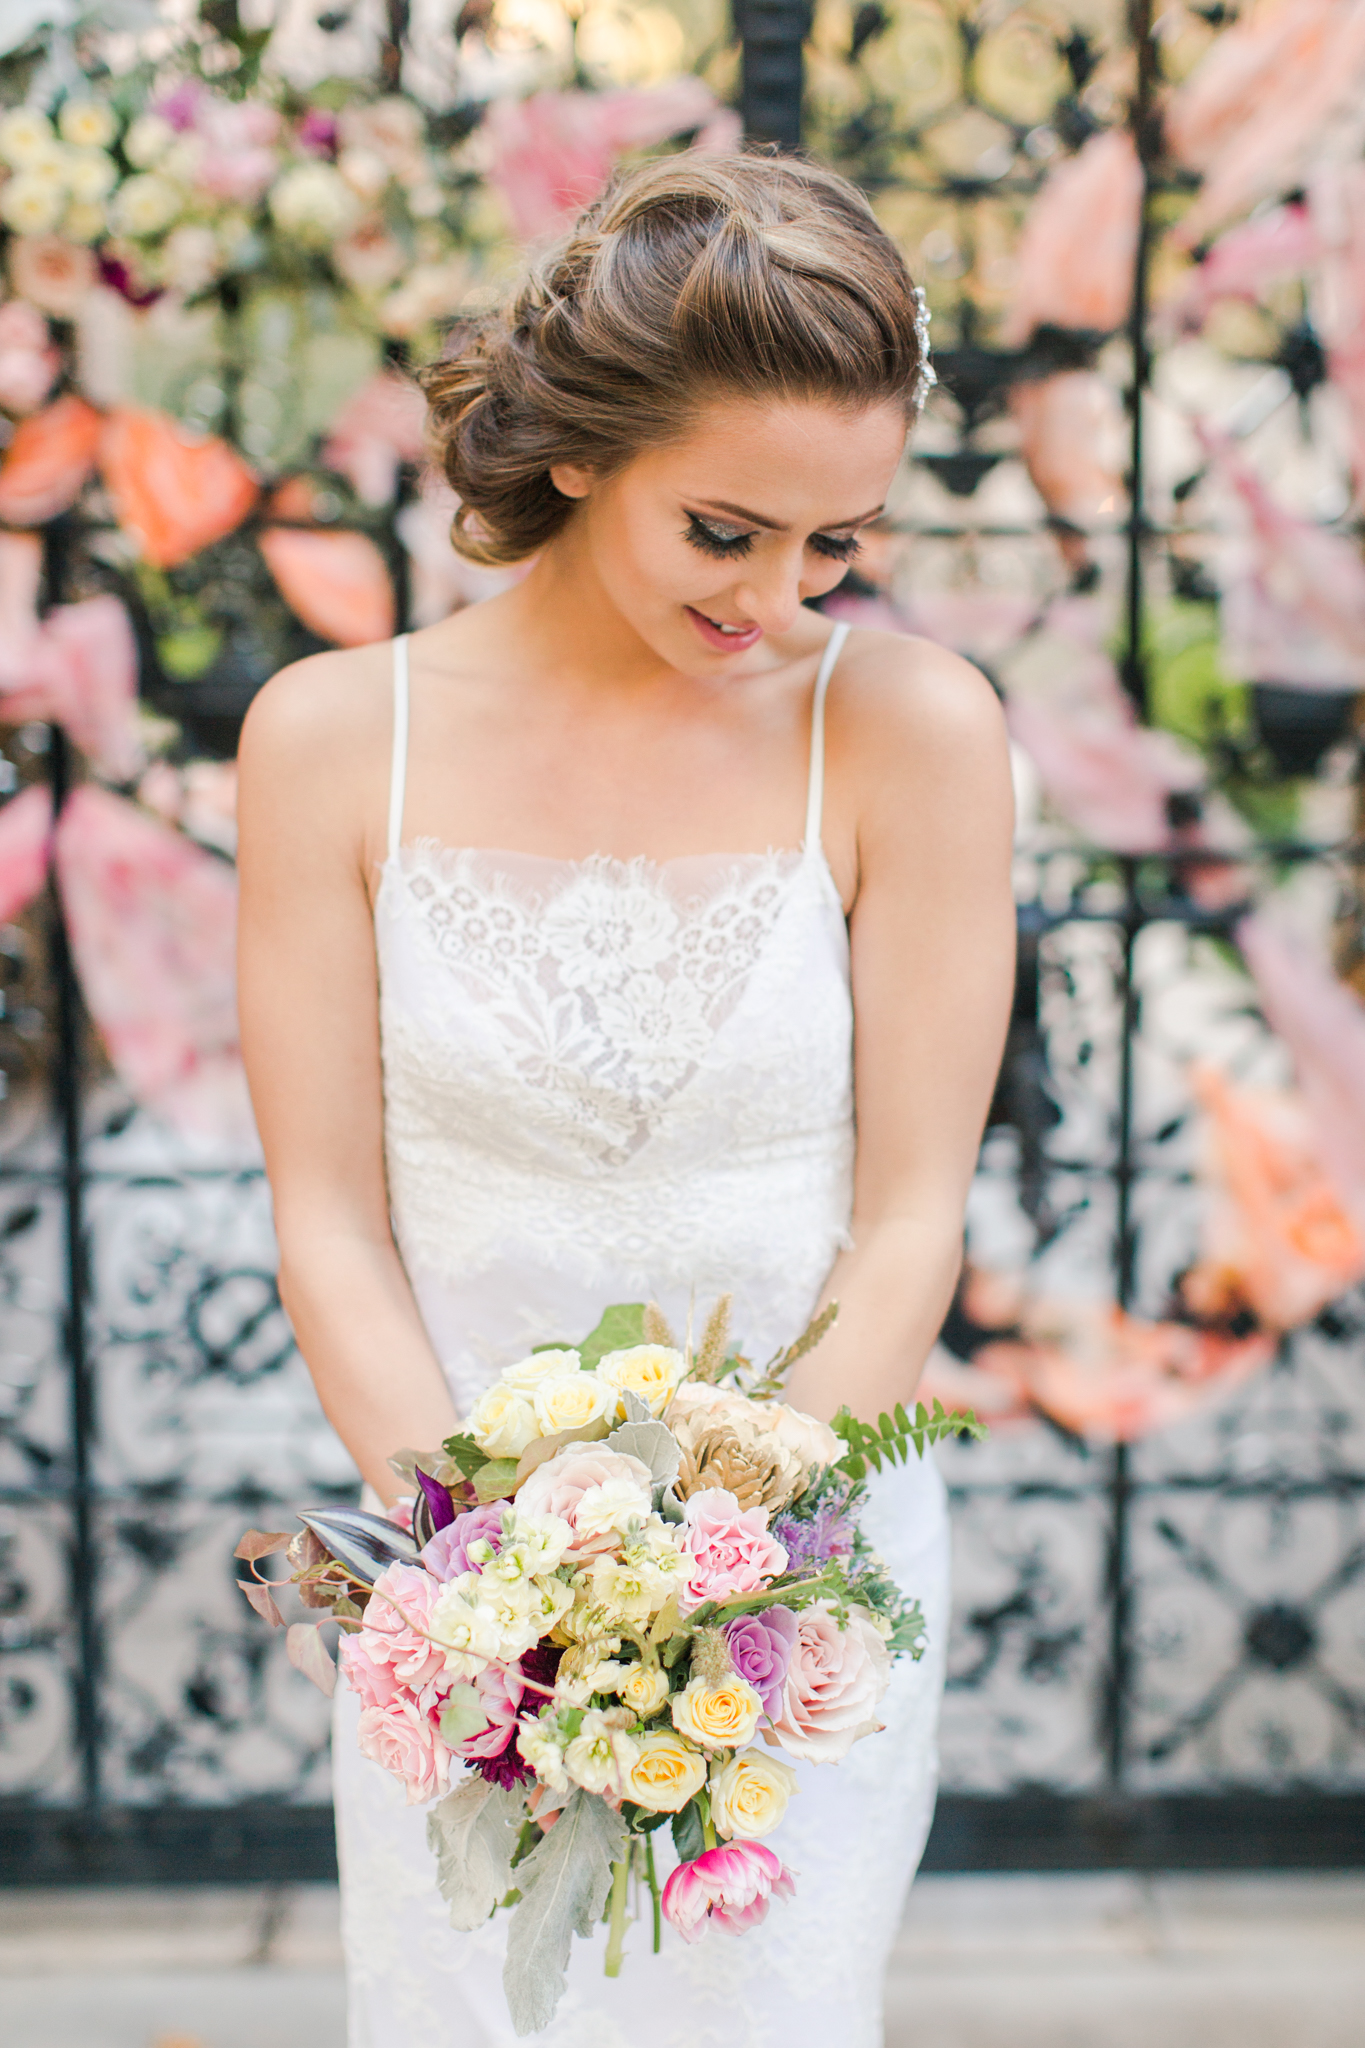 12 things you need to plan an Elopement Styled Shoot